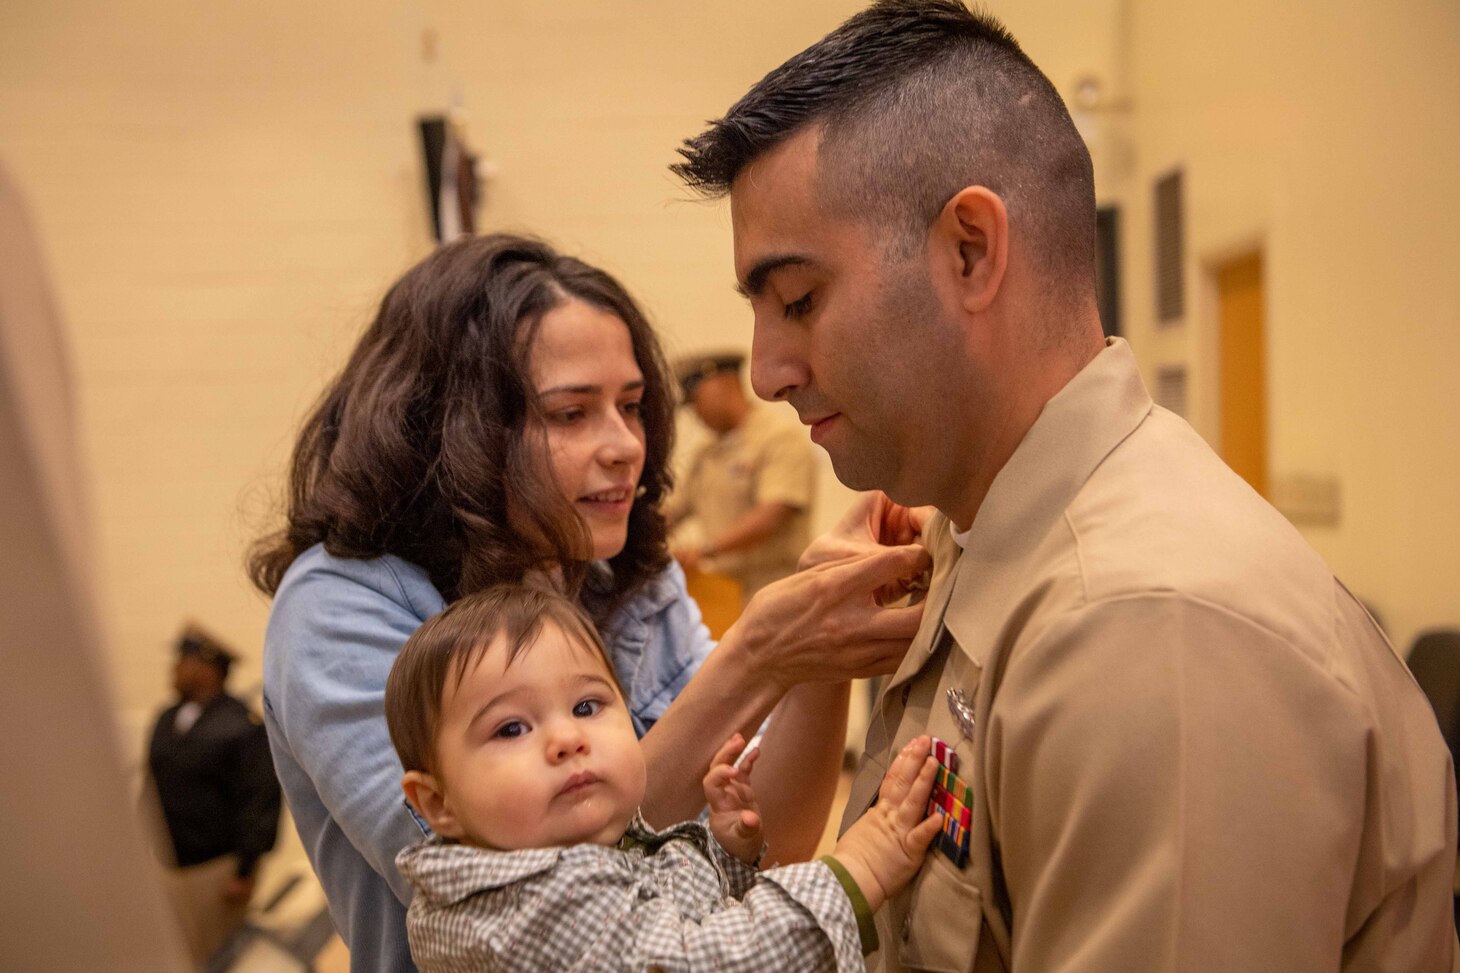 NAVAL STATION NORFOLK (Oct. 21, 2022) Family members pin Chief Electronics Technician Israel Rivera’s anchors during the Naval Surface Force Atlantic chief petty officer pinning ceremony onboard Naval Station Norfolk, Oct. 21. Nine Sailors received their gold-fouled anchors during the ceremony. (U.S. Navy photo by Mass Communication Specialist 1st Class Jacob Milham)